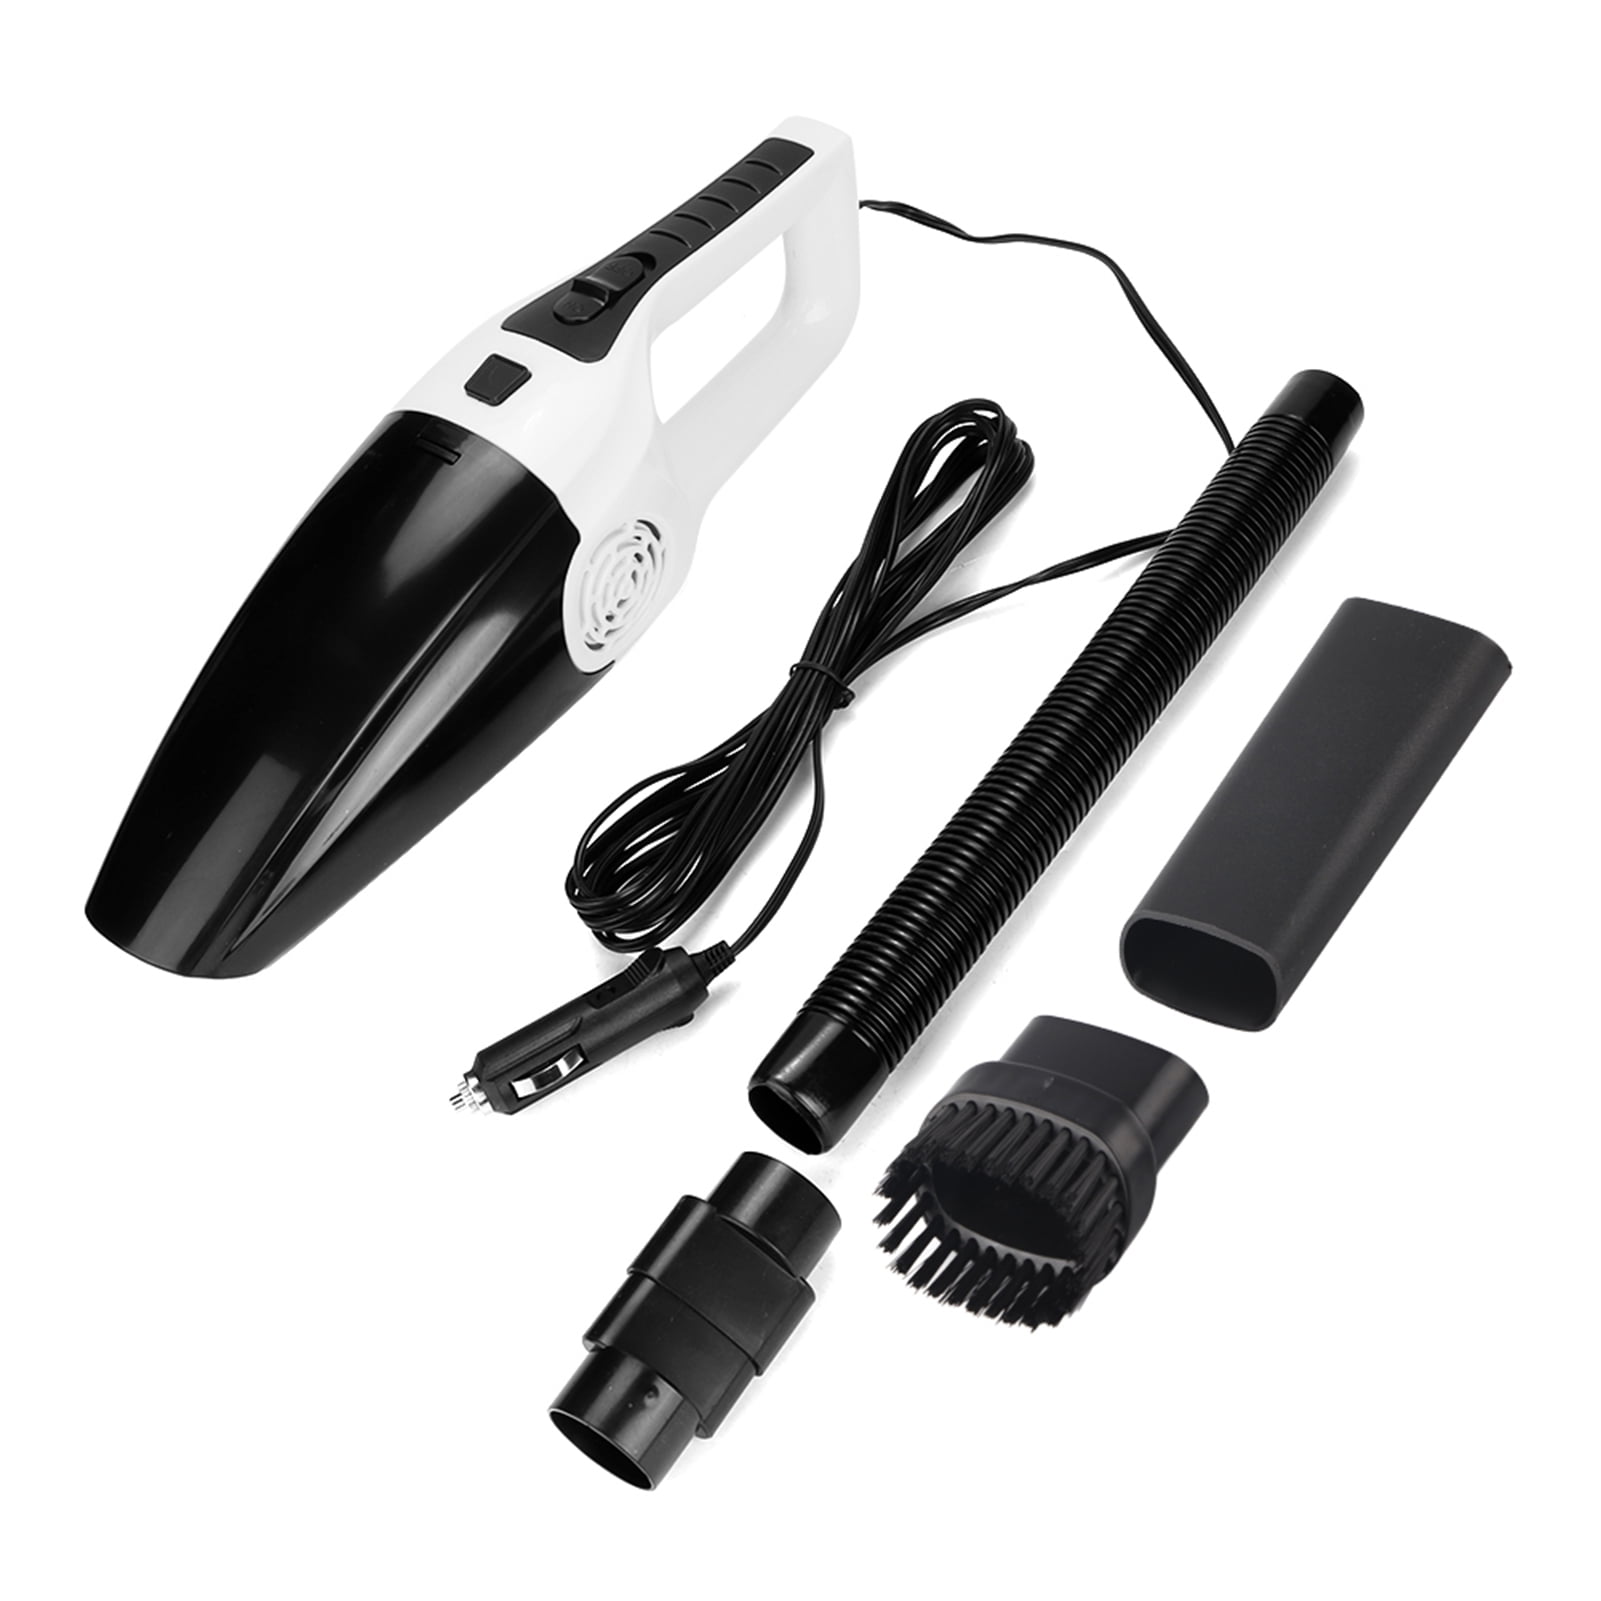 Black Car Vacuum Cleaner,12V 3600pa ABS Car Vacuum Cleaner Portable Handheld Wet Dry Dual-use Dust Catcher 